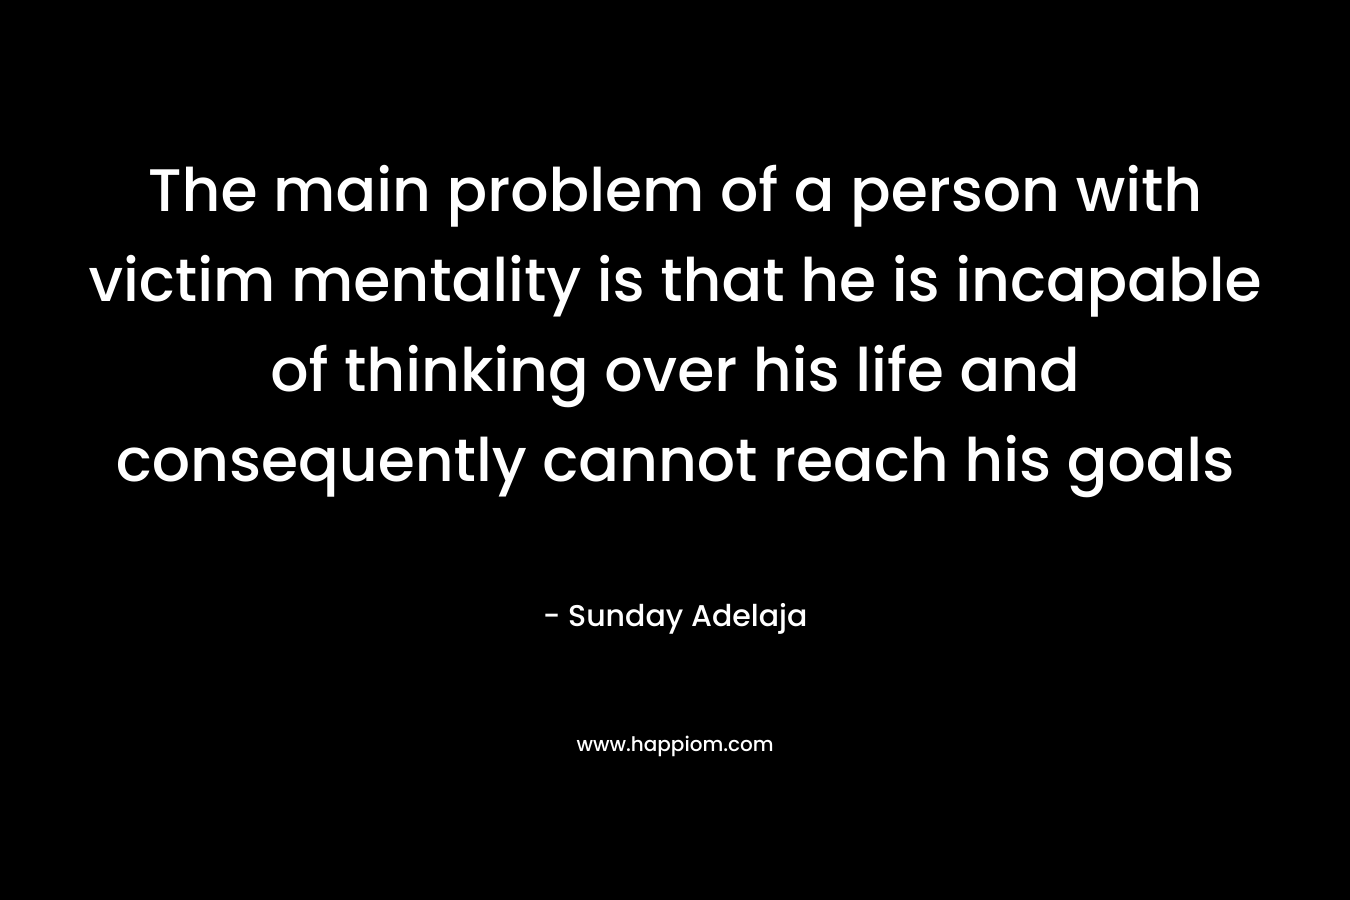 The main problem of a person with victim mentality is that he is incapable of thinking over his life and consequently cannot reach his goals